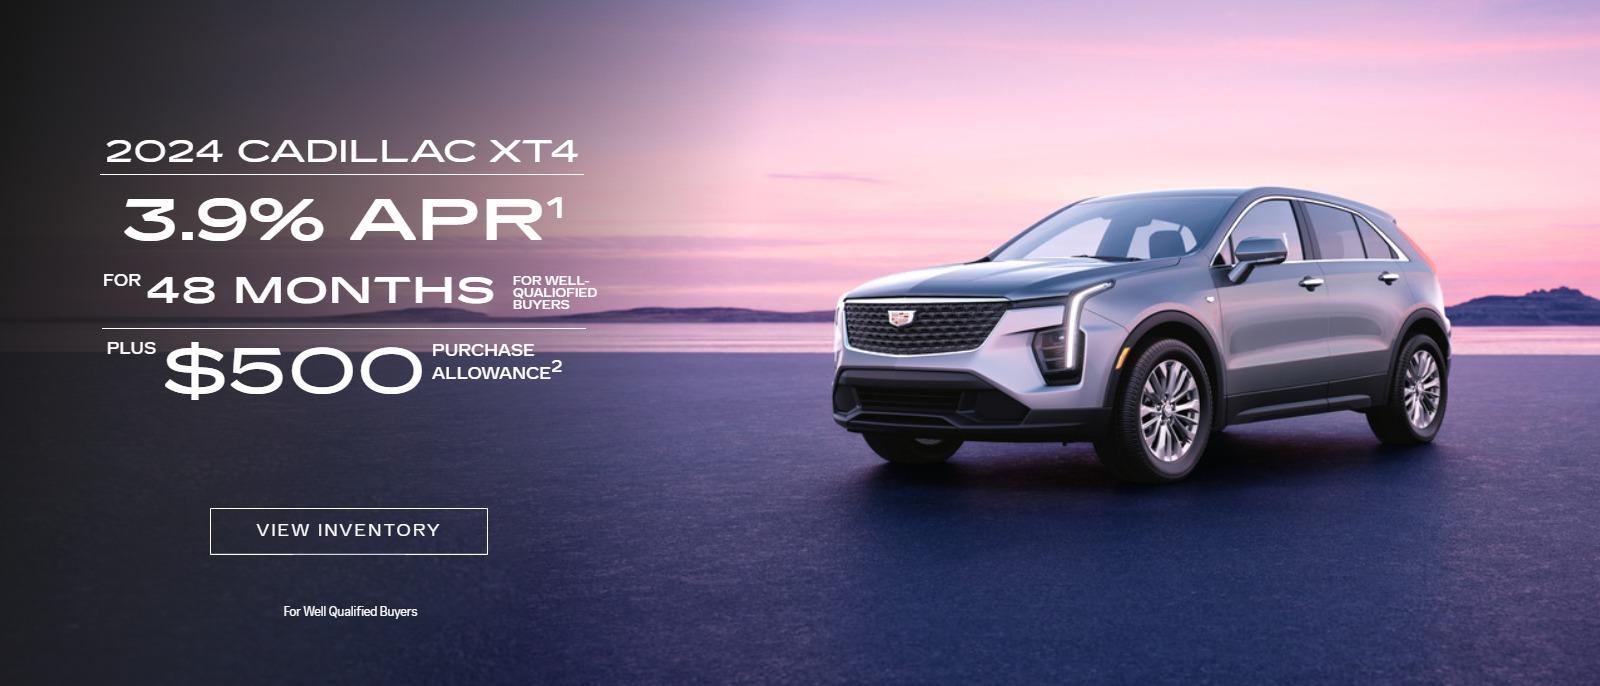 2024 CADILLAC XT4
3.9% APR for 48 months
Plus $500 Purchase Allowance